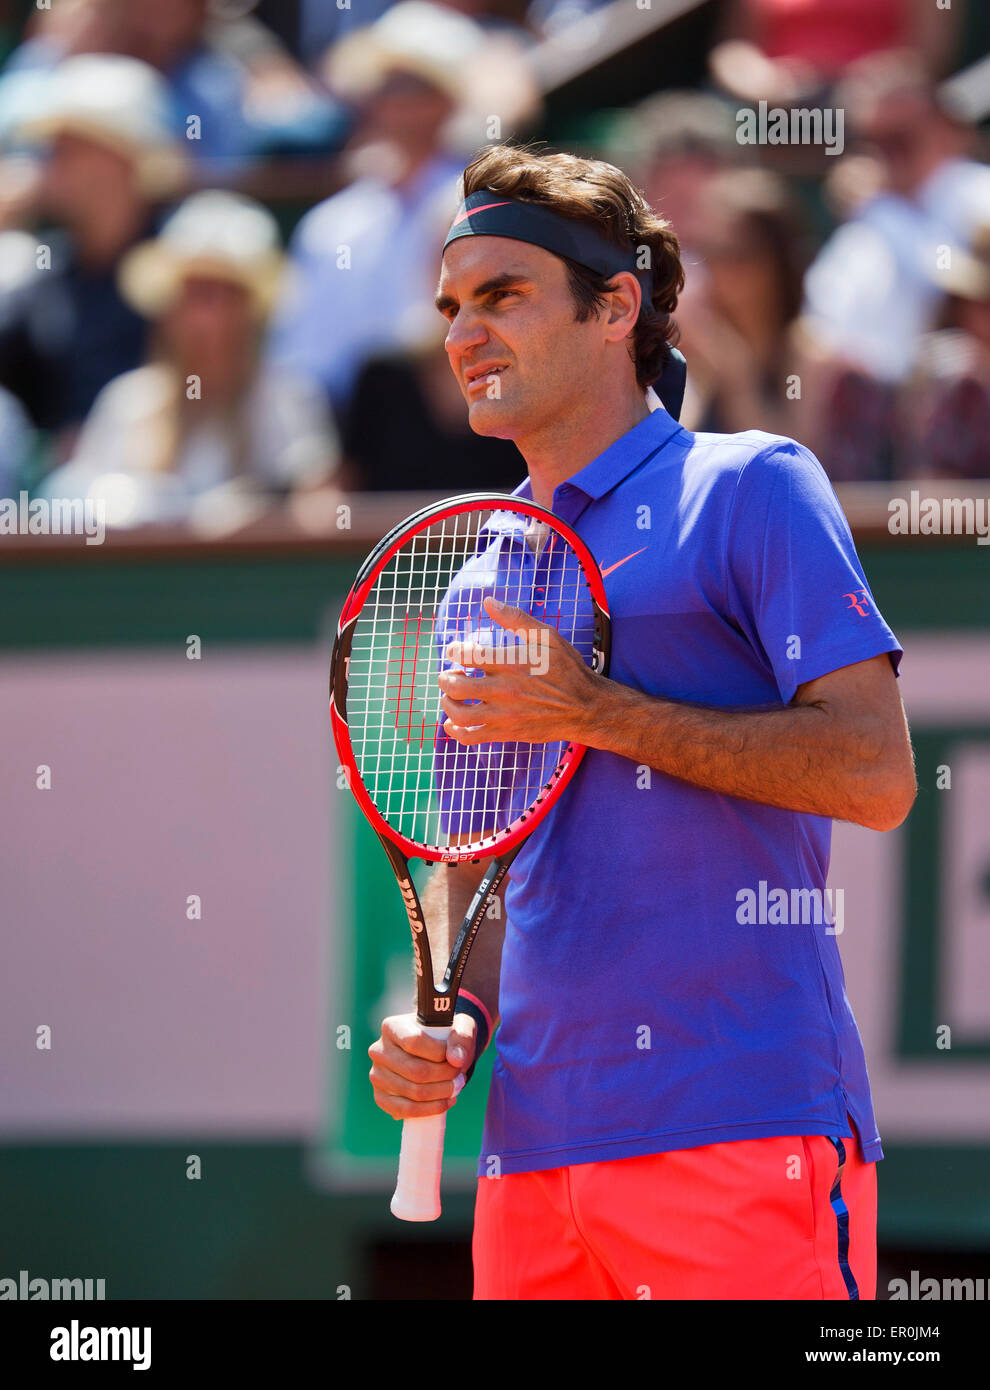 France, Paris. 24th May, 2015. Tennis, Roland Garros, Roger Federer (SUI)  Credit: Henk Koster/Alamy Live News Stock Photo - Alamy